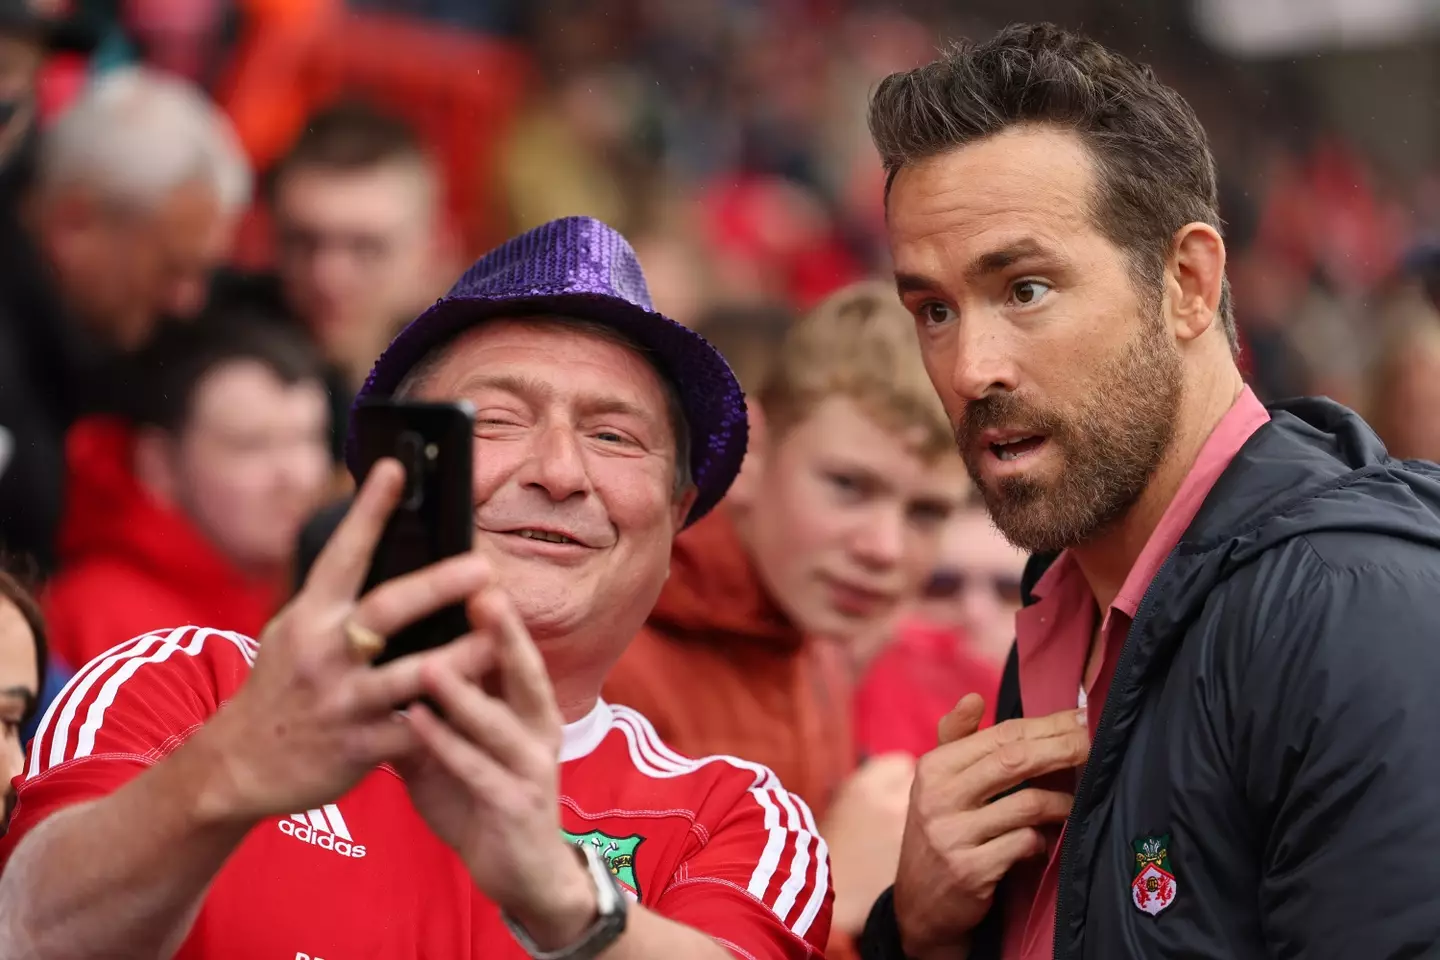 Wrexham have secured back to back promotions since their Hollywood takeover (Getty)